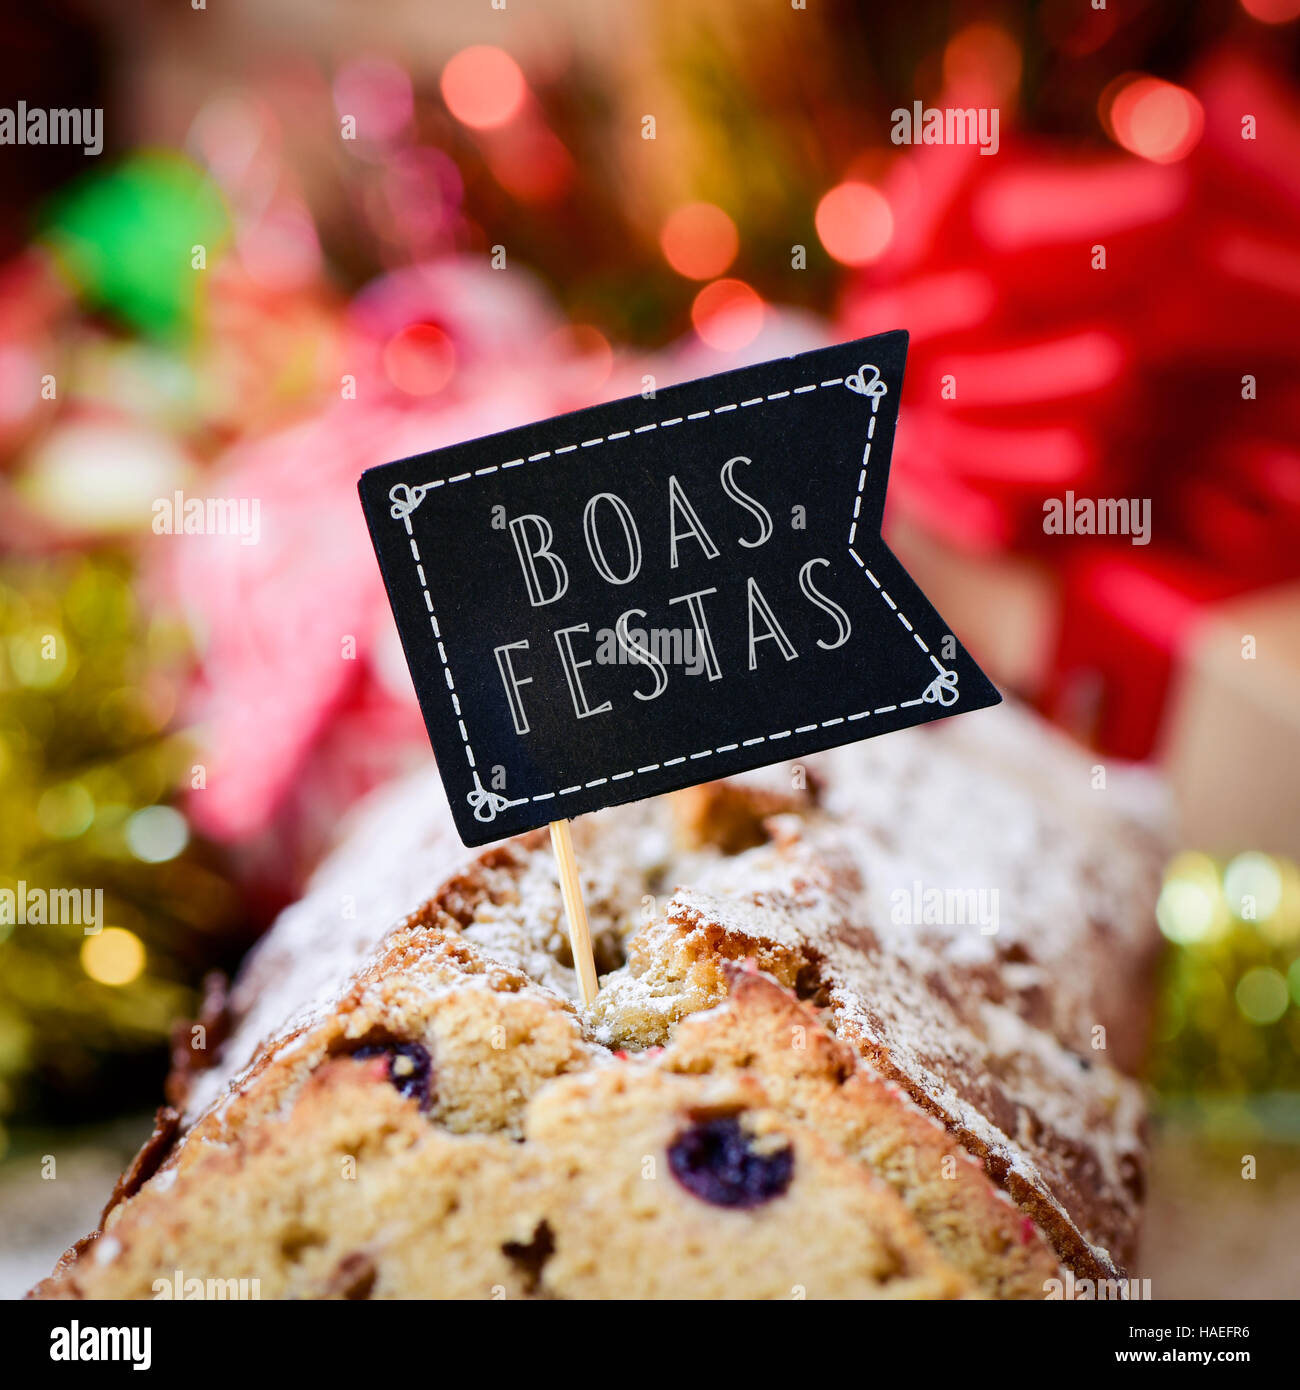 closeup of a fruitcake topped with a flag-shaped signboard with the text boas festas, happy holidays written in portuguese, on a table full of christm Stock Photo